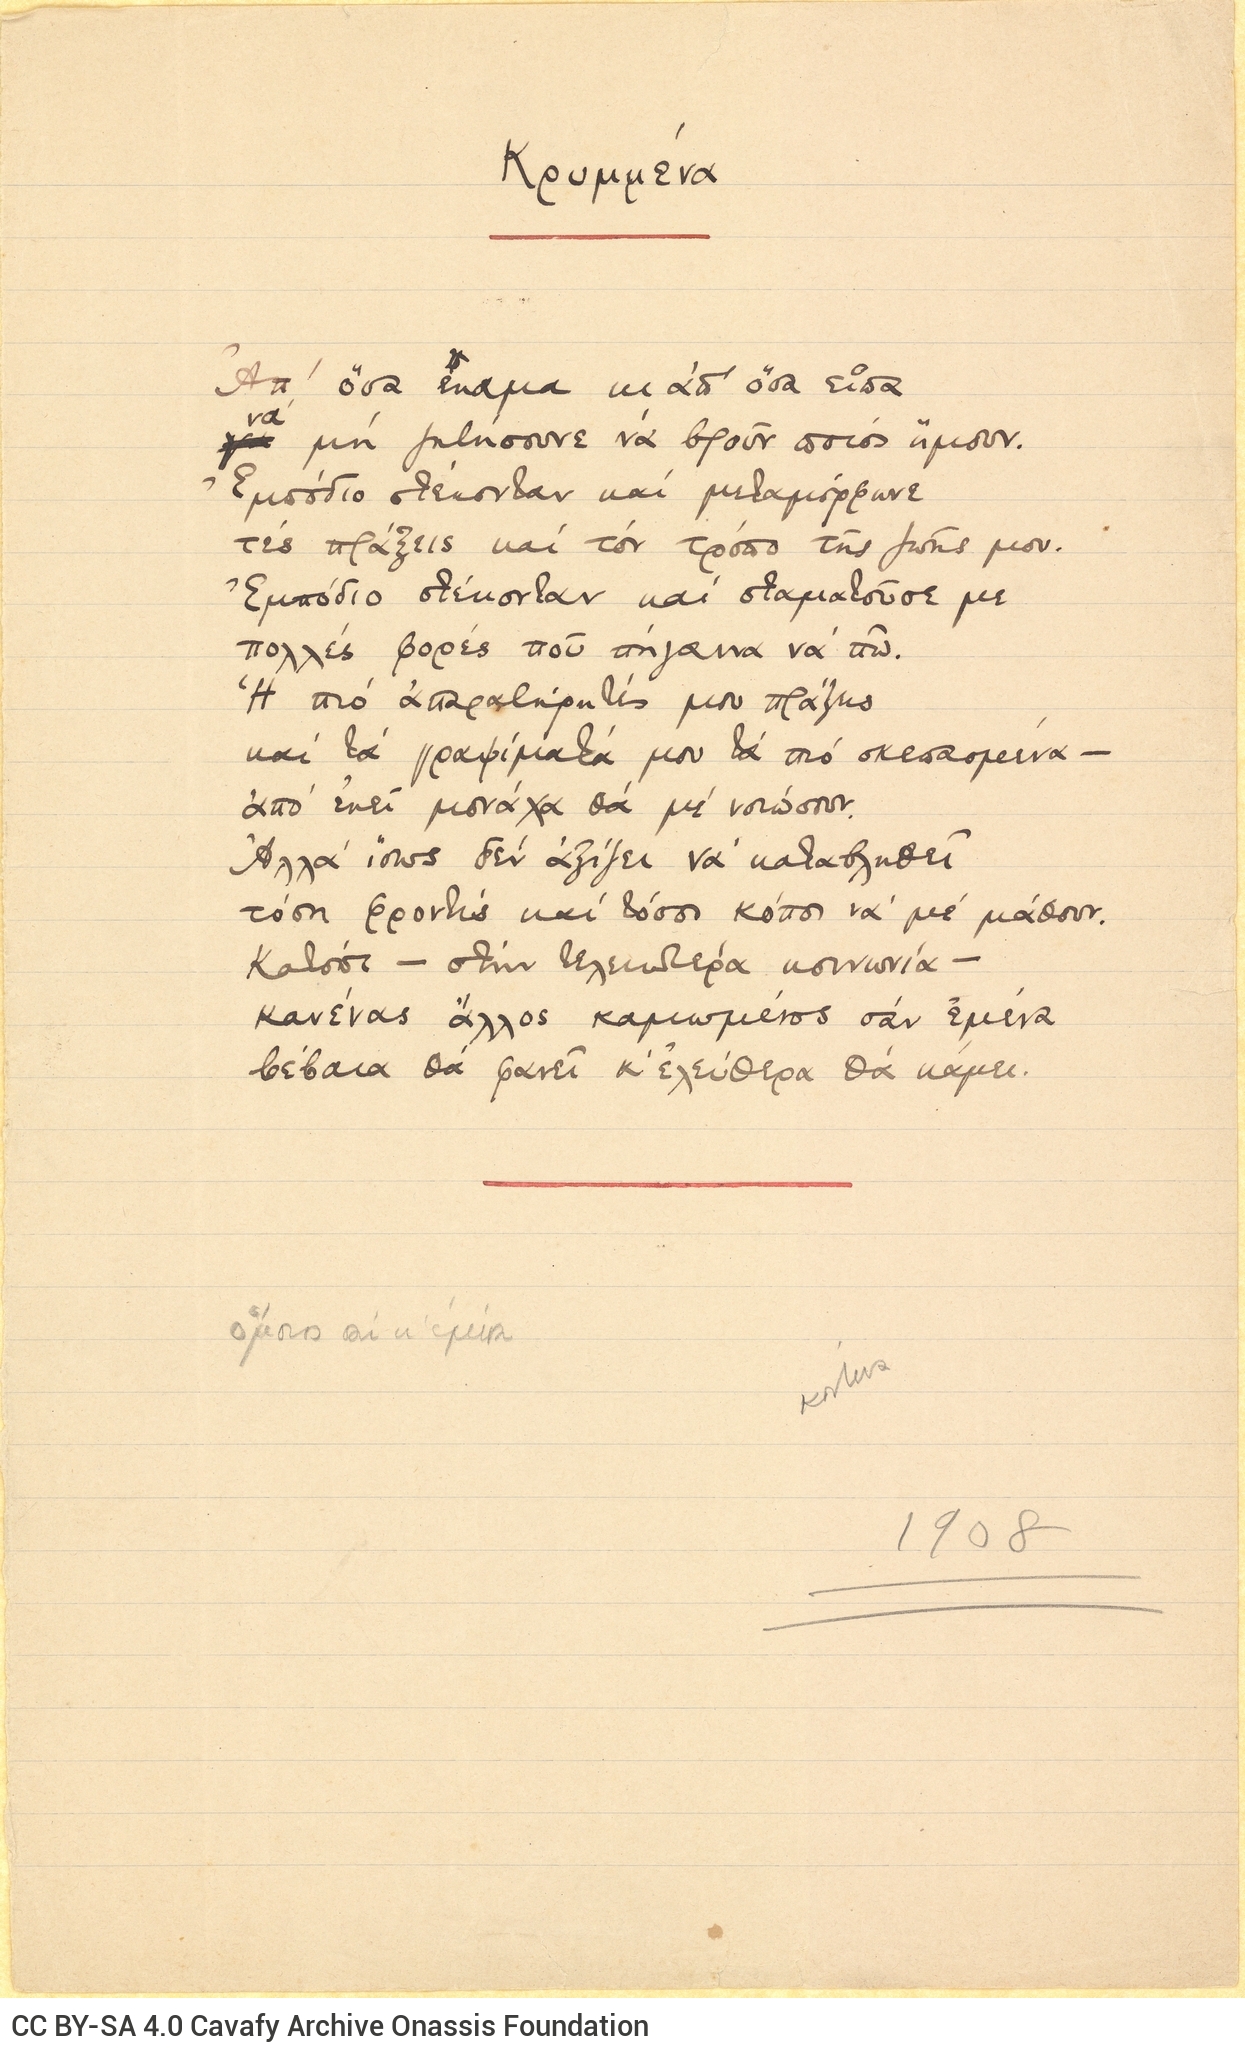 Manuscript of the poem "Hidden" on one side of a ruled sheet. The title has been underlined and there is a line in red ink